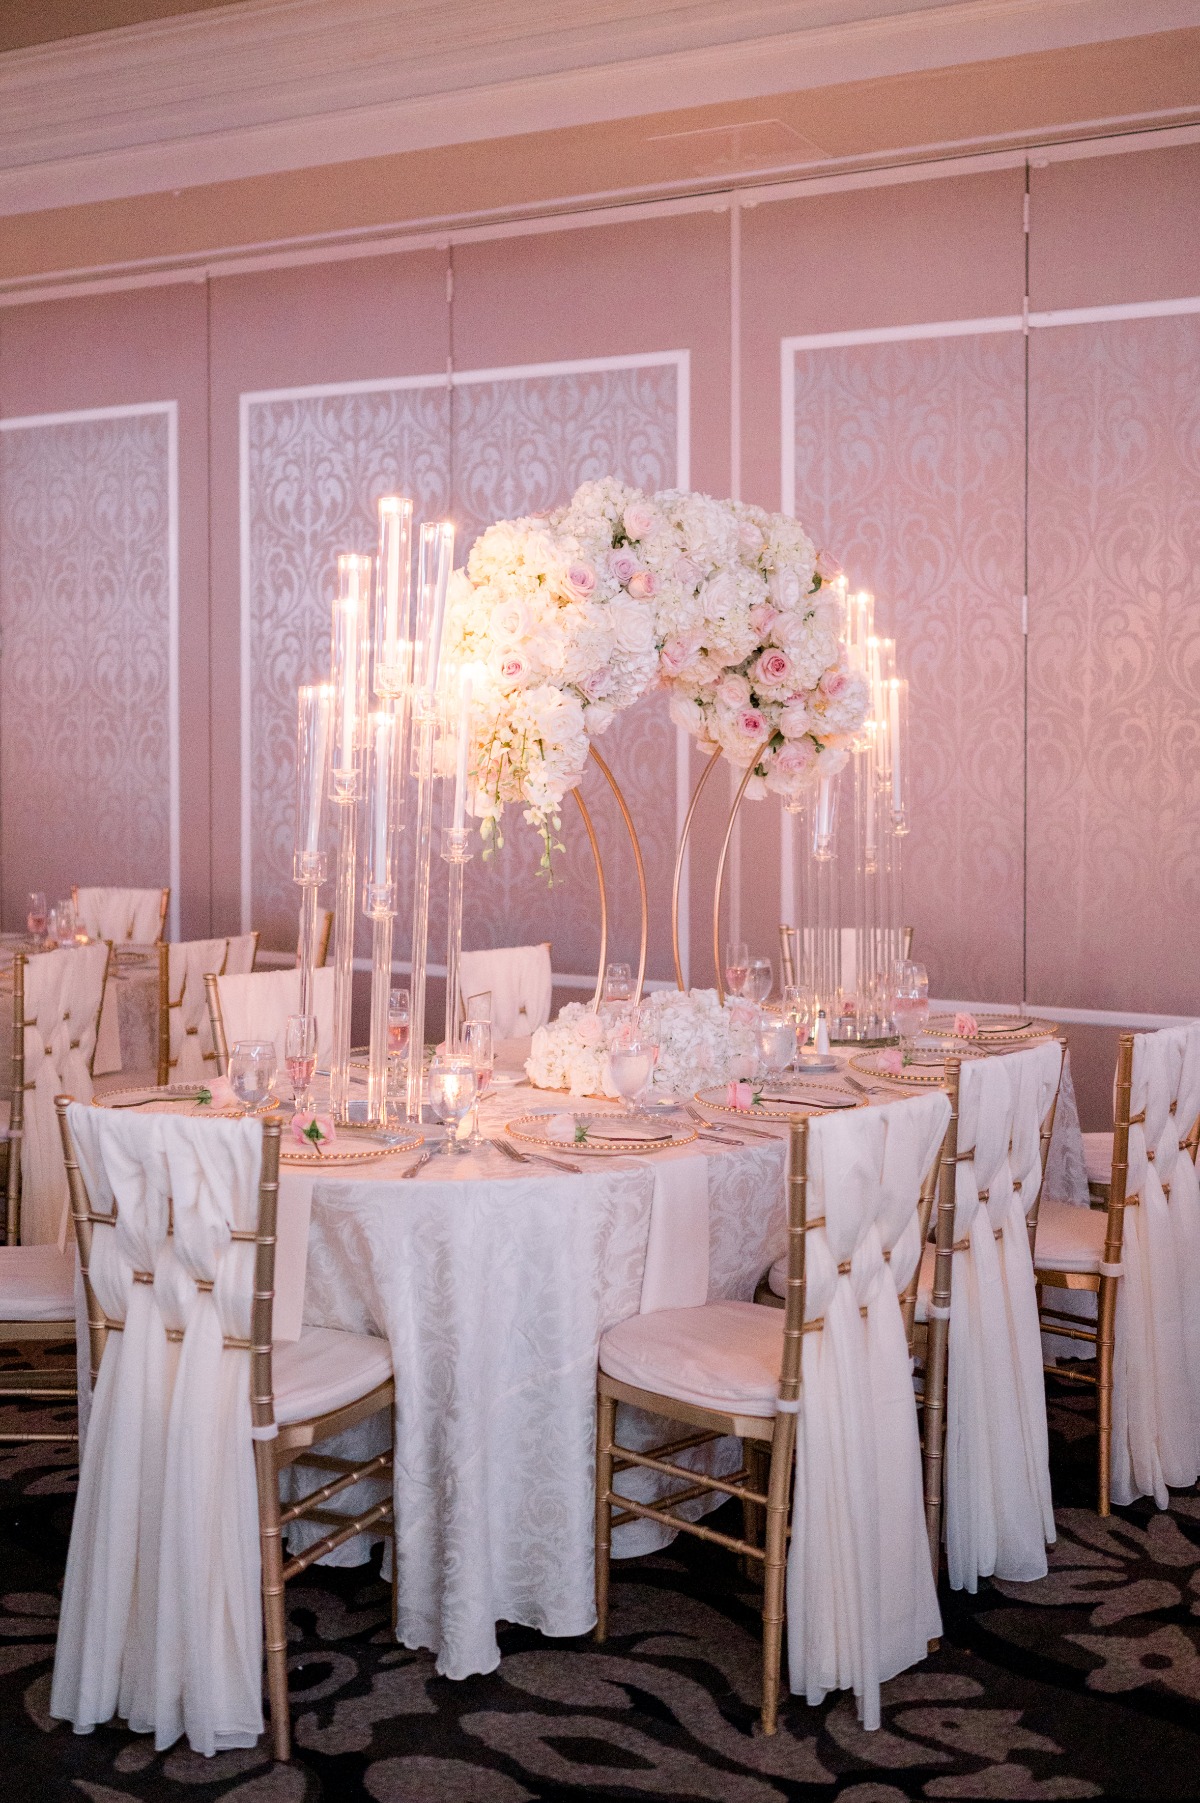 Over the Top Greek Wedding Drenched in Florals at the Grand Marquis New Jersey